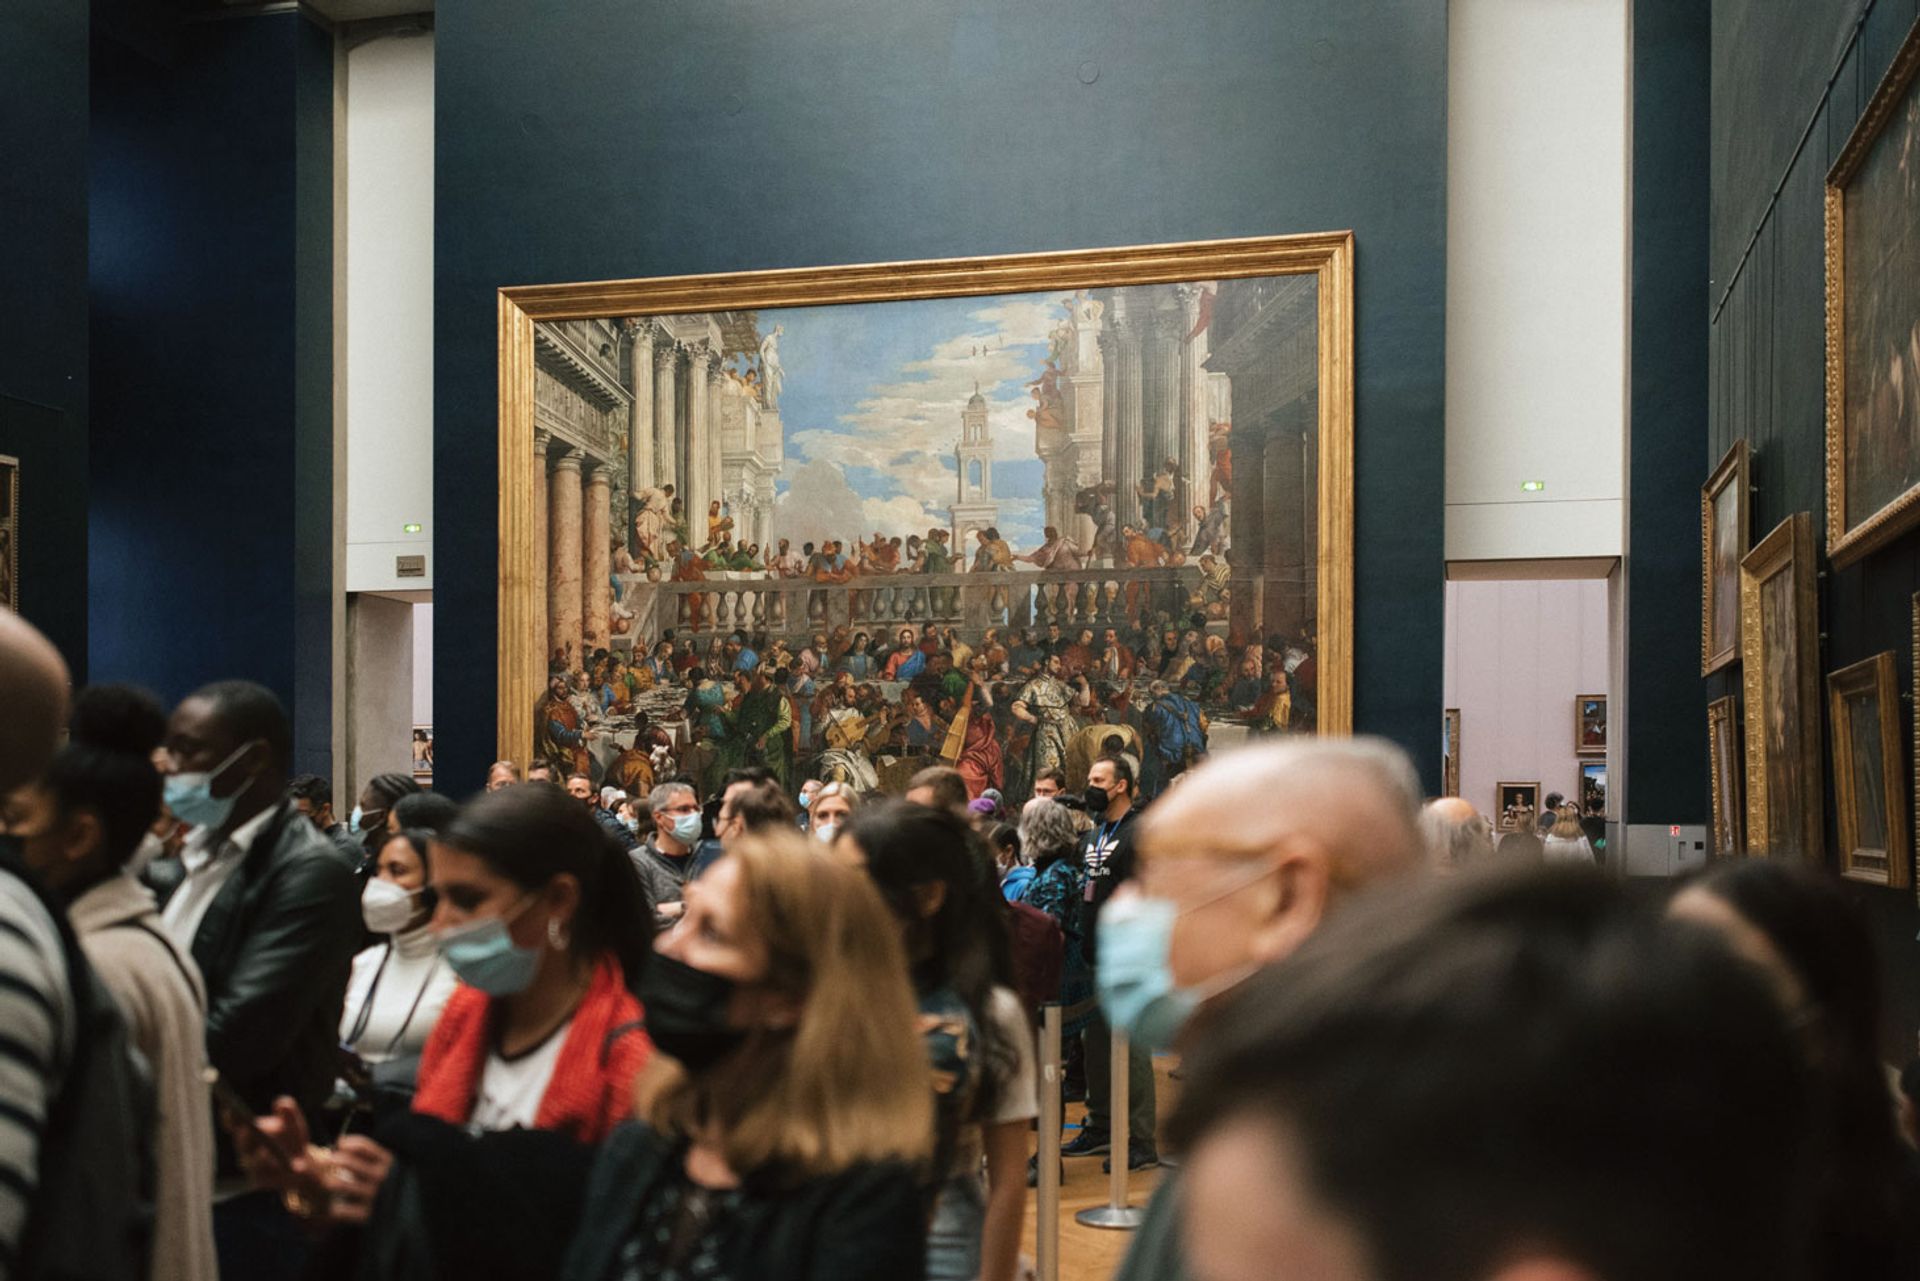 Masked visitors look at the Mona Lisa in the Musée du Louvre. In 2021 it welcomed around 2.8 million visitors—less than a third of the people it did in 2018, its record year Photo: Francesco Zivoli/Unsplash